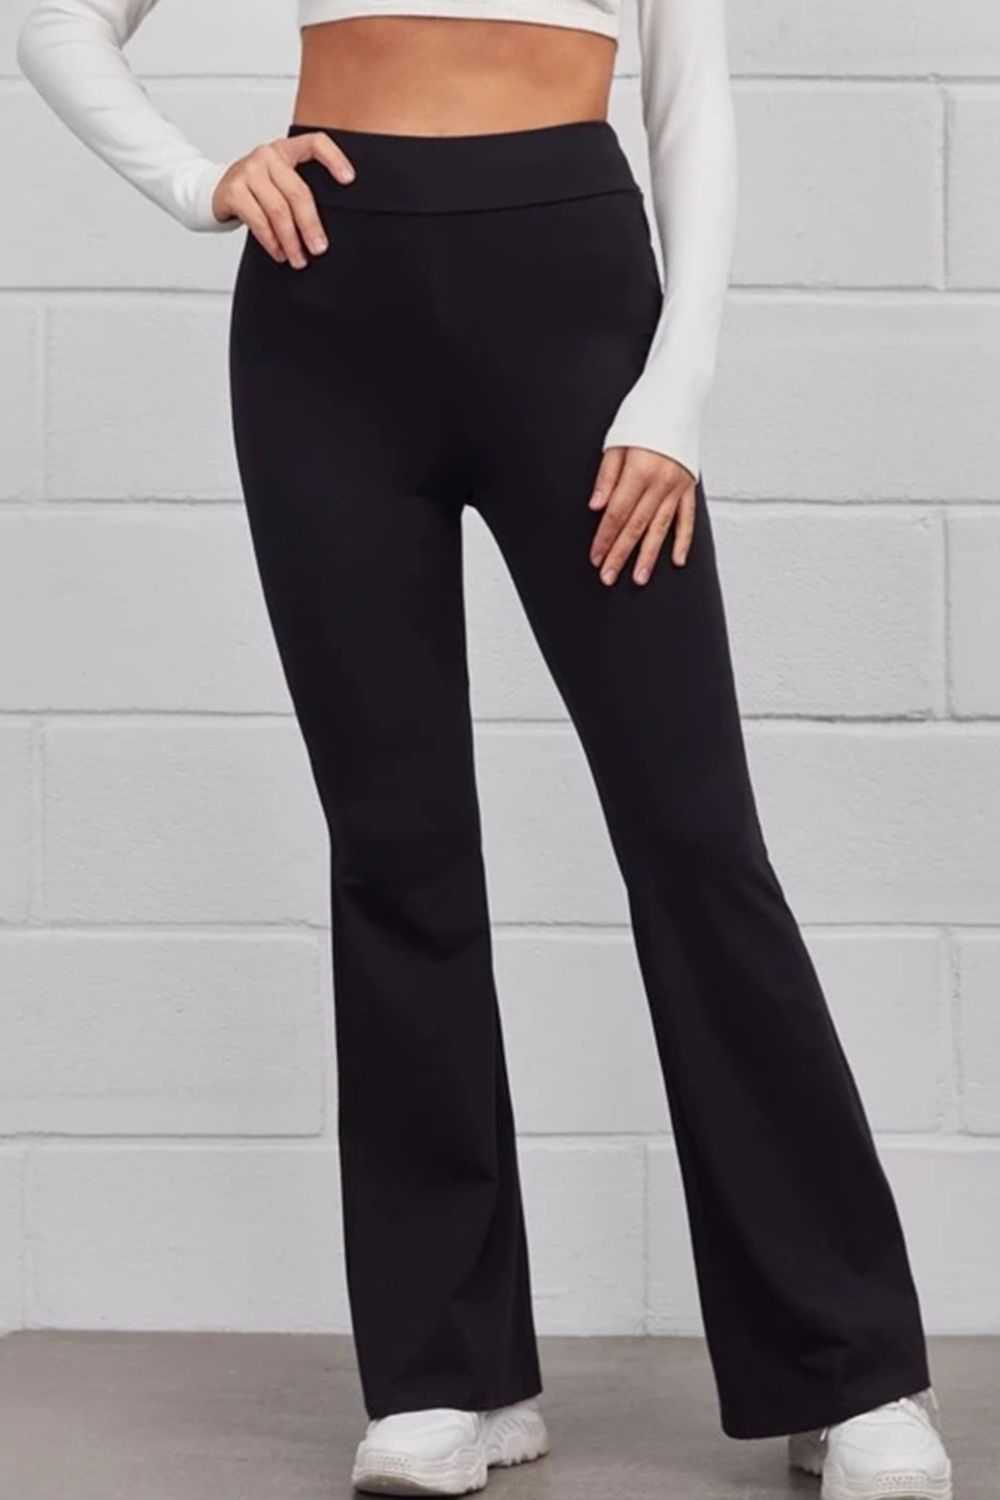 SAMPLE Pull On Flared Pants XL BLACK – Adrians Boutique